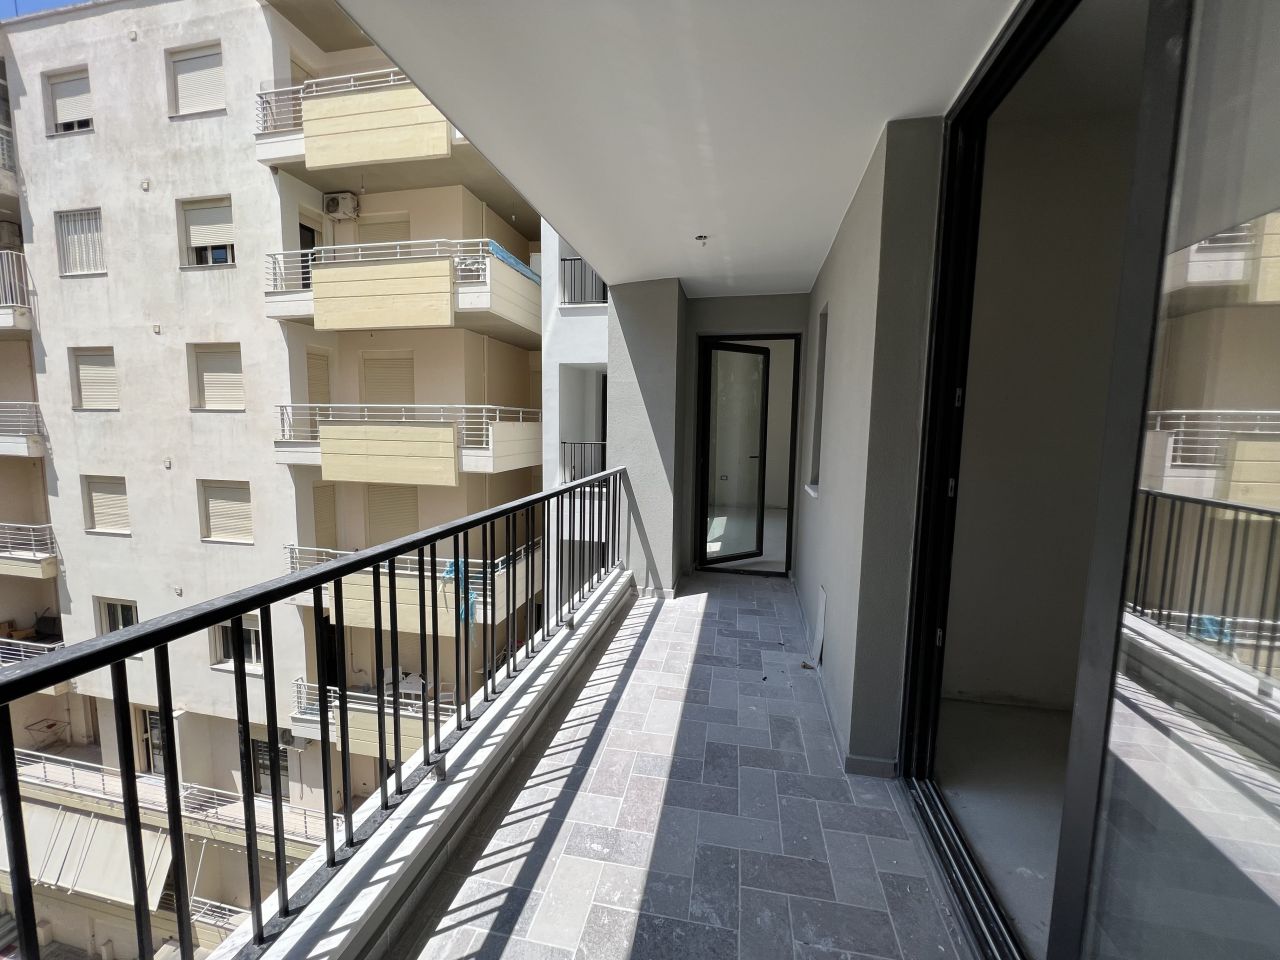 Two Bedroom Apartment In Vlore Albania For Sale 